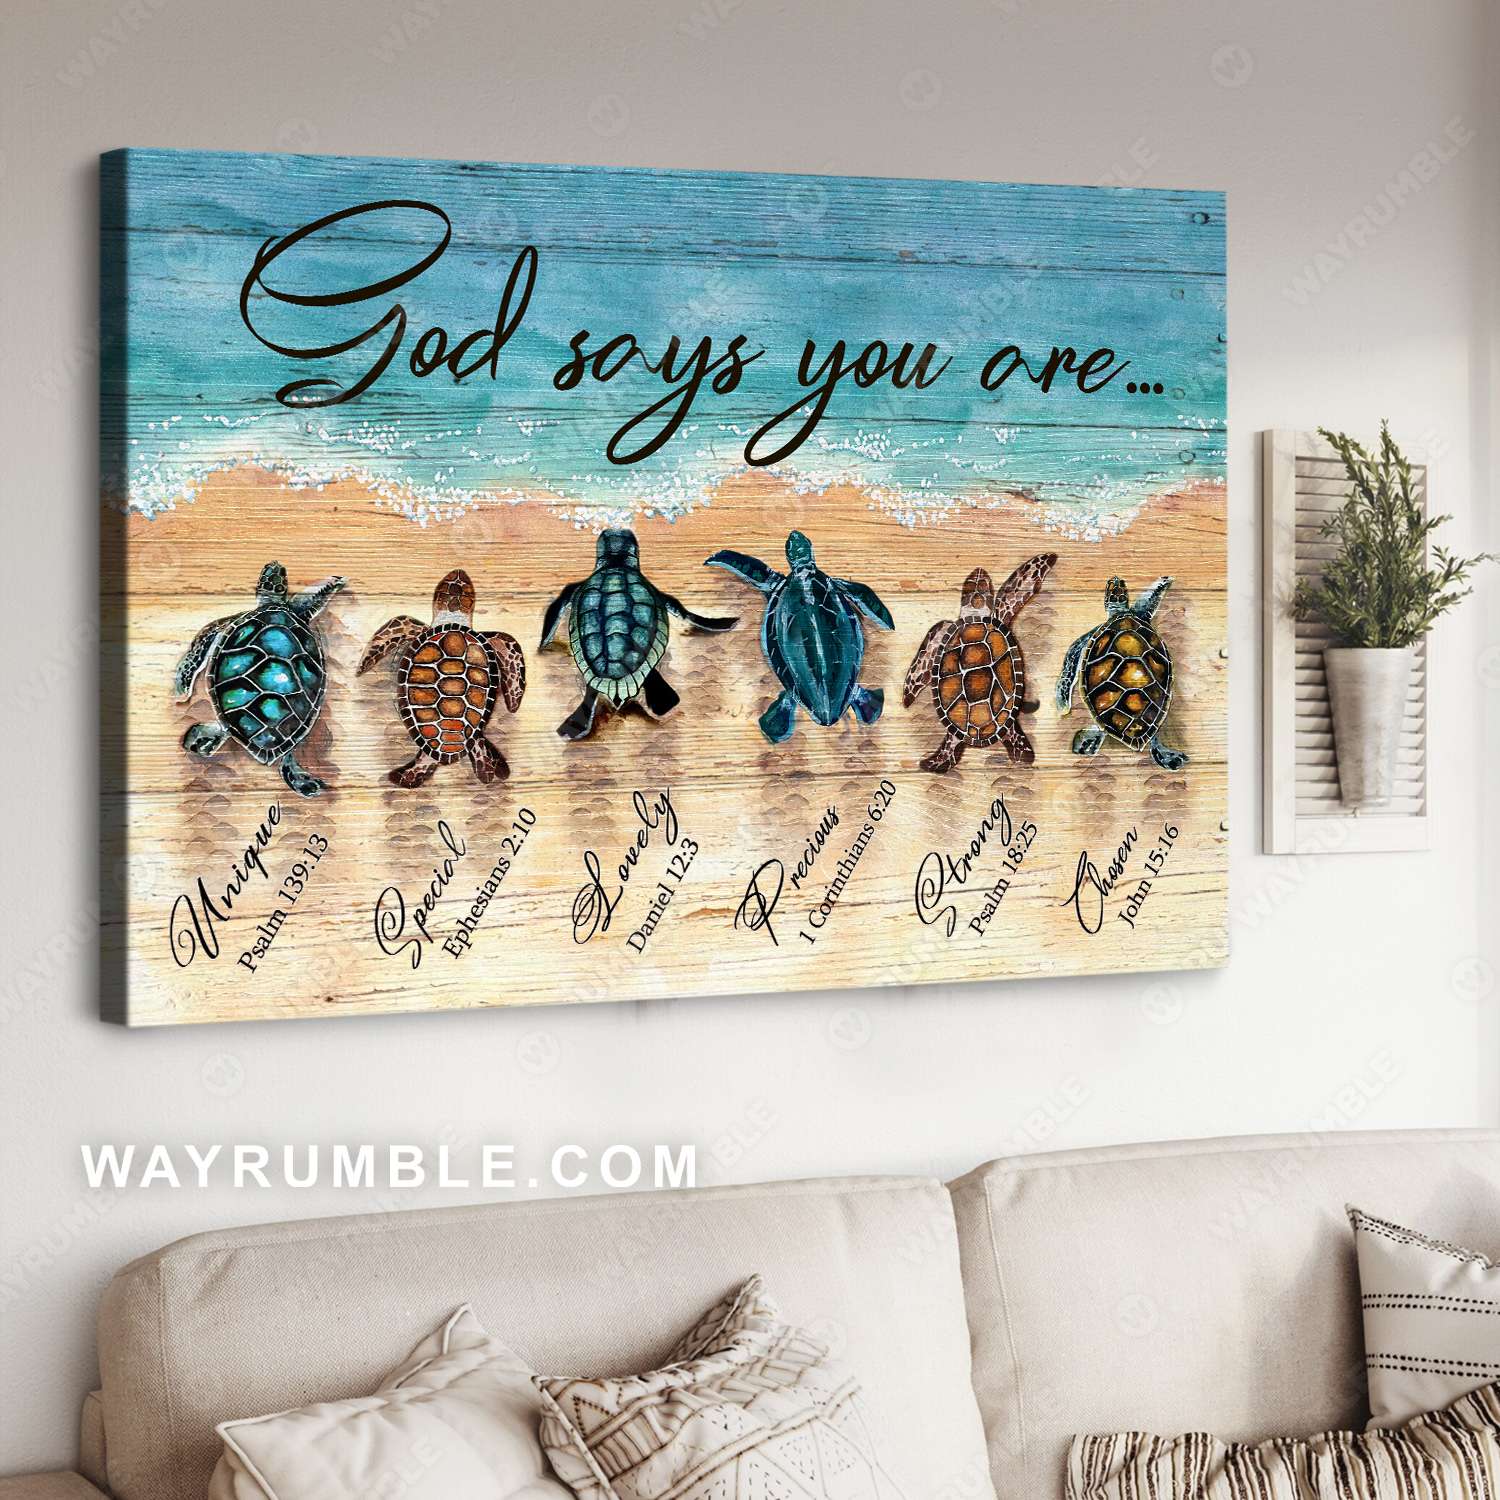 Sea turtle, Sand beach painting, God says you are beautiful and unique - Jesus Landscape Canvas Prints, Wall Art